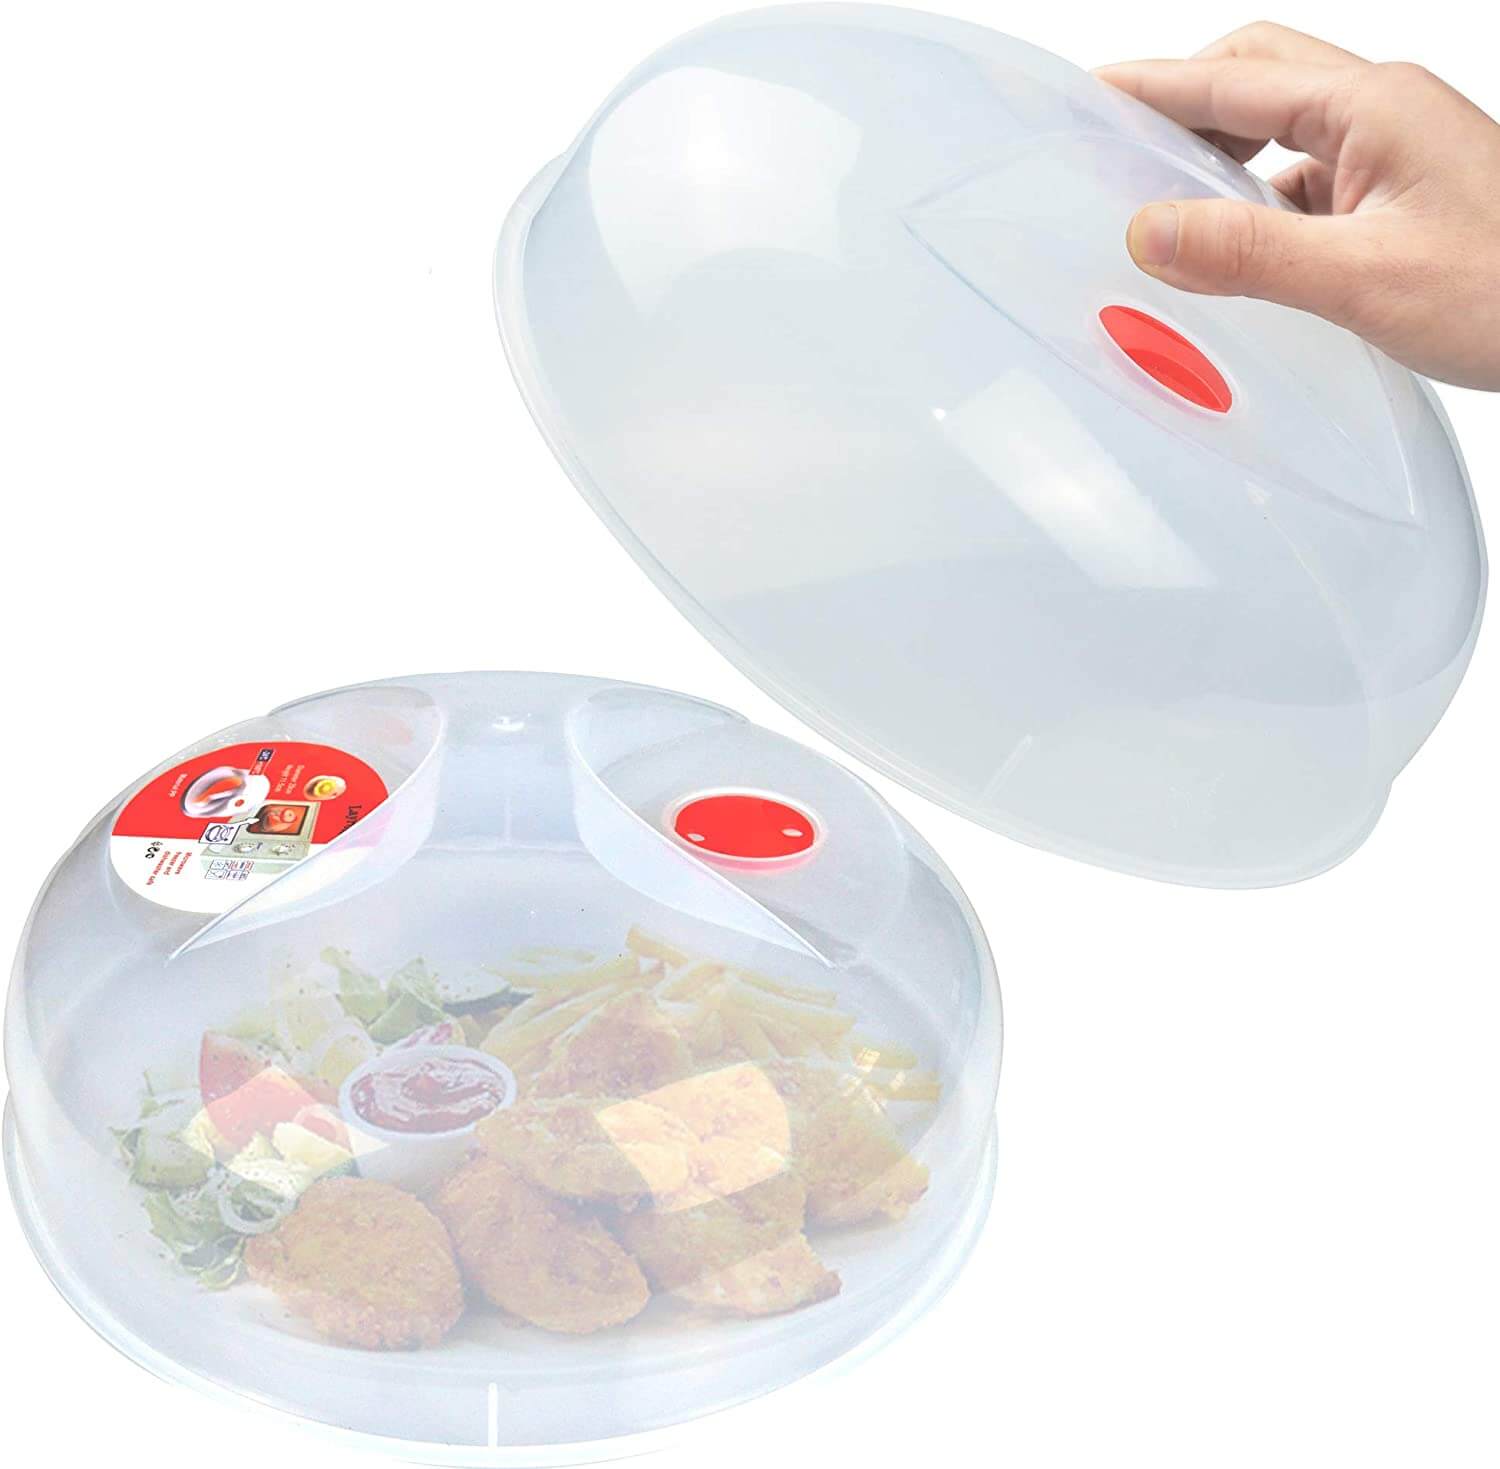 Microwave Splatter Cover Vented Glass Cover Splatter Guard Lid with Collapsible Silicone for Food As Pot Cover 11.8 inch Large Plate Cover for 6 7 8 9